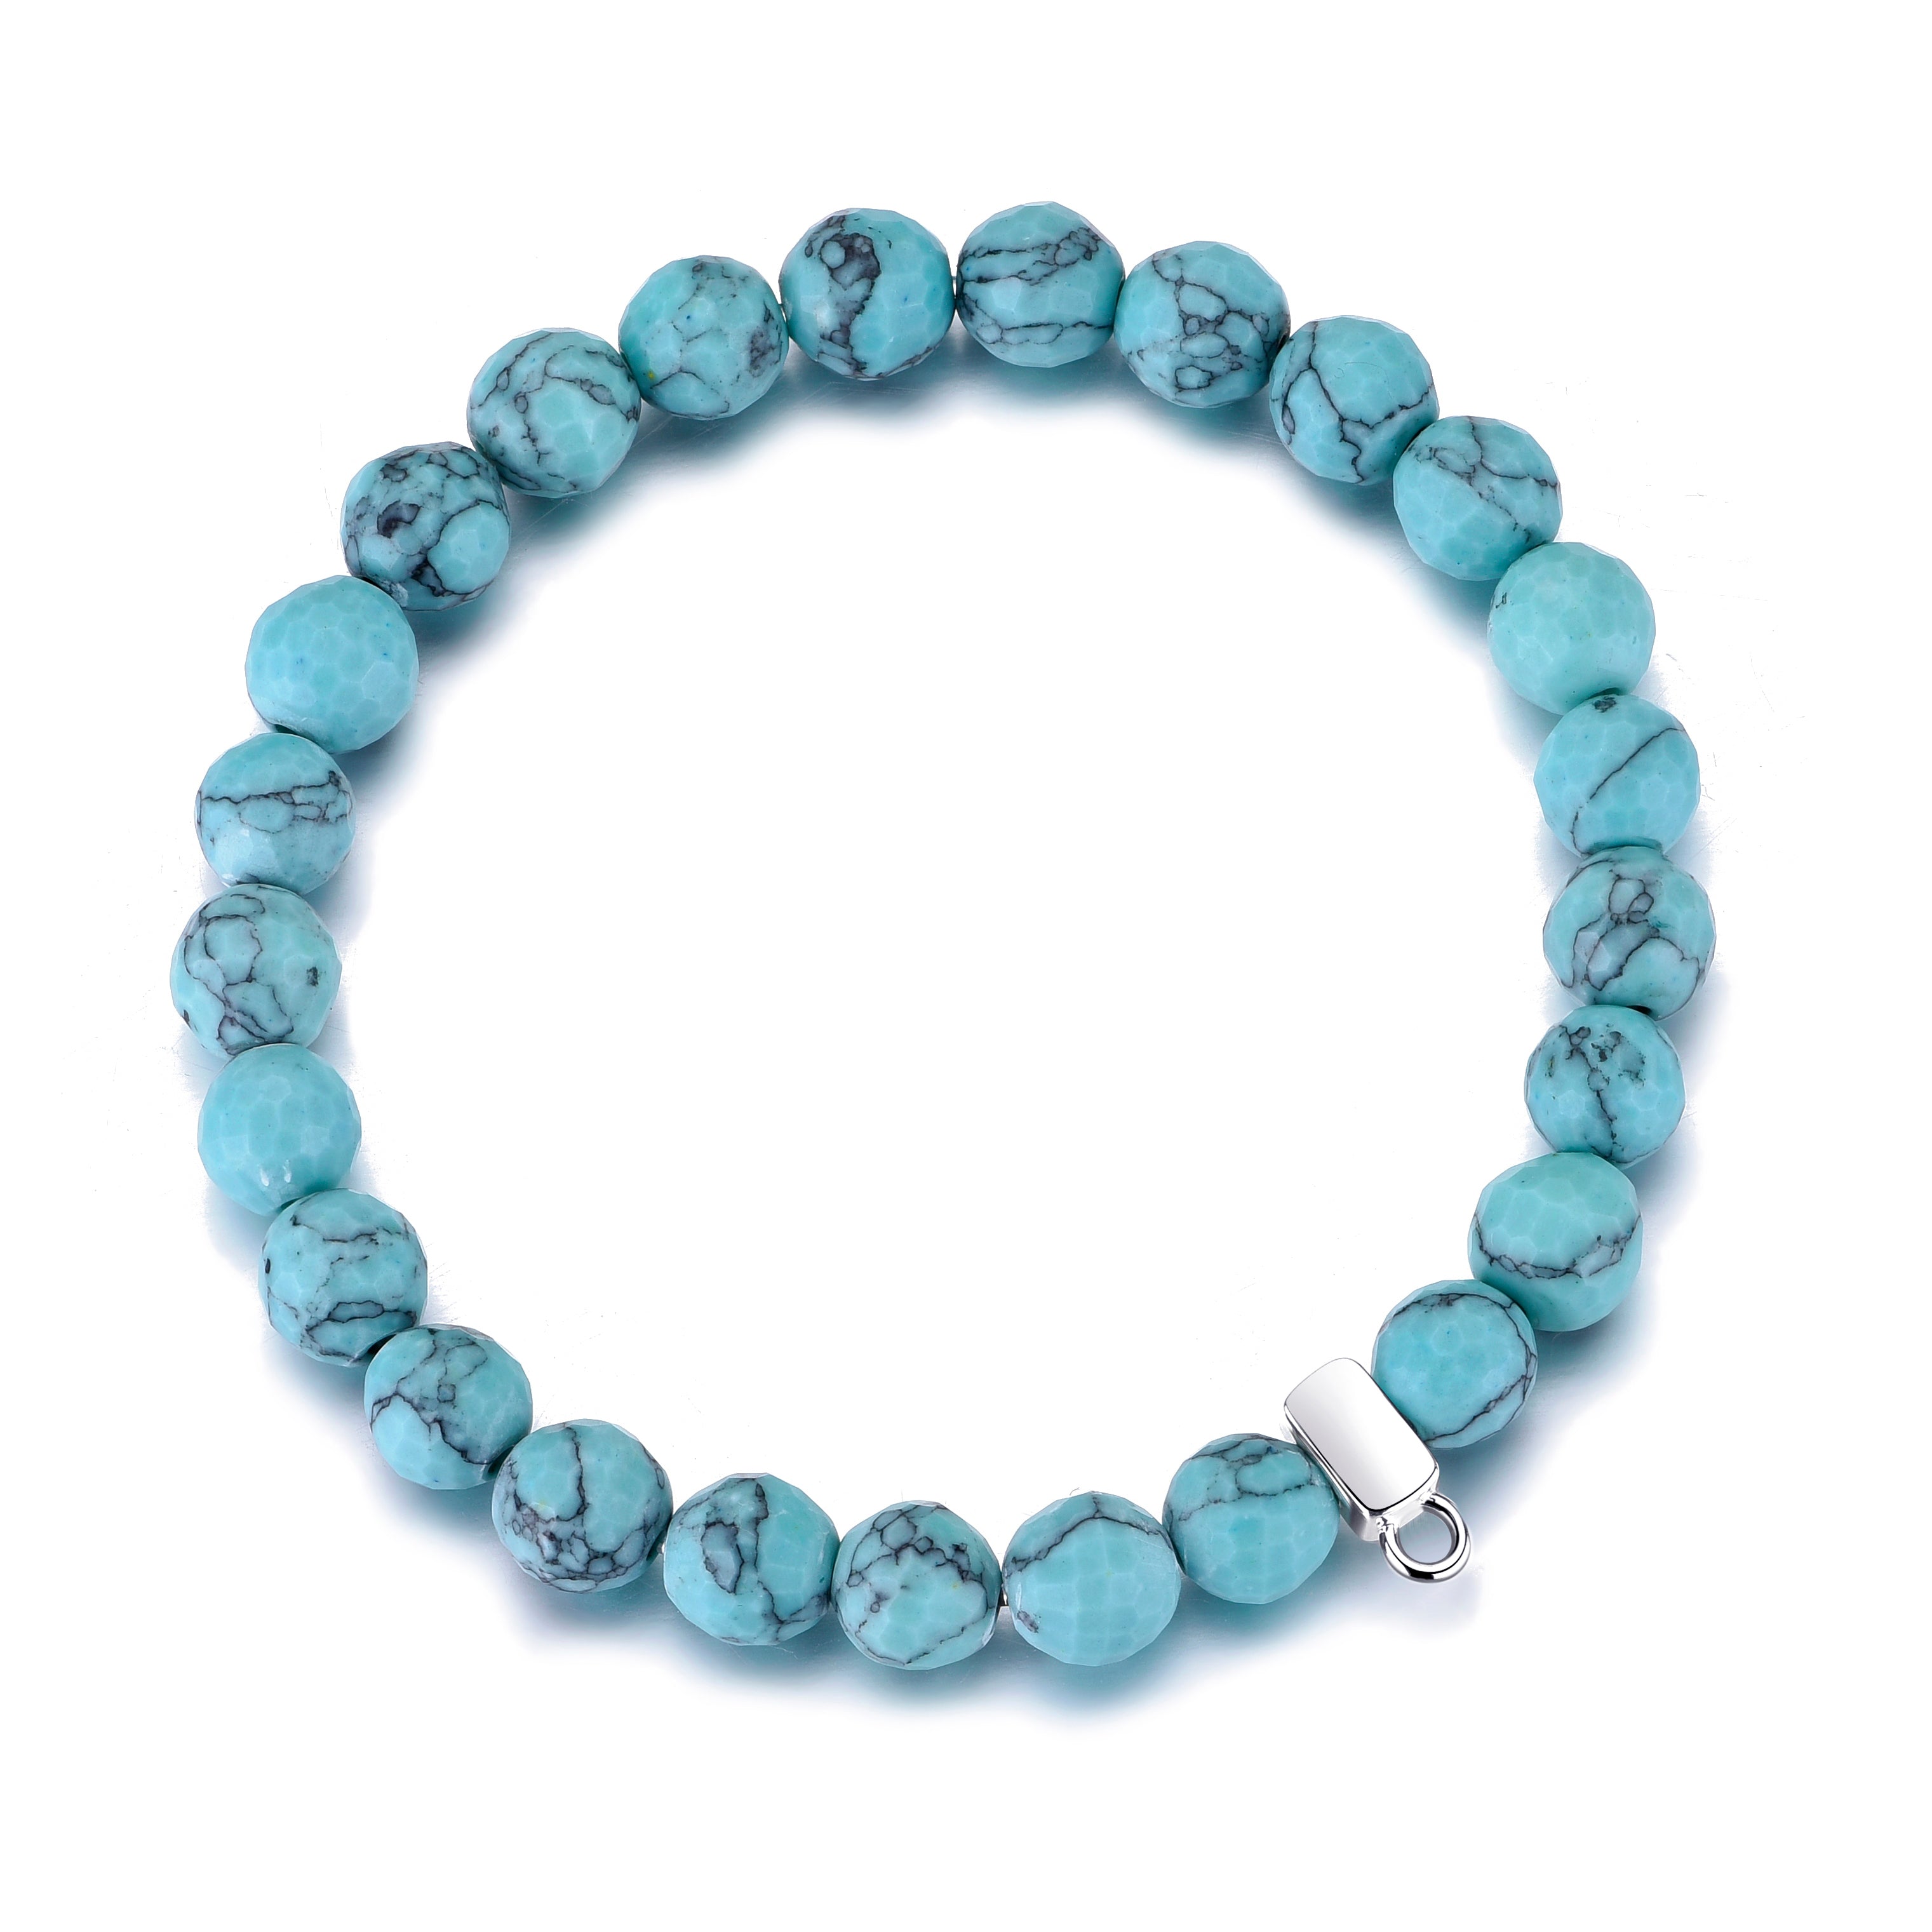 Faceted Synthetic Turquoise Gemstone Charm Stretch Bracelet by Philip Jones Jewellery